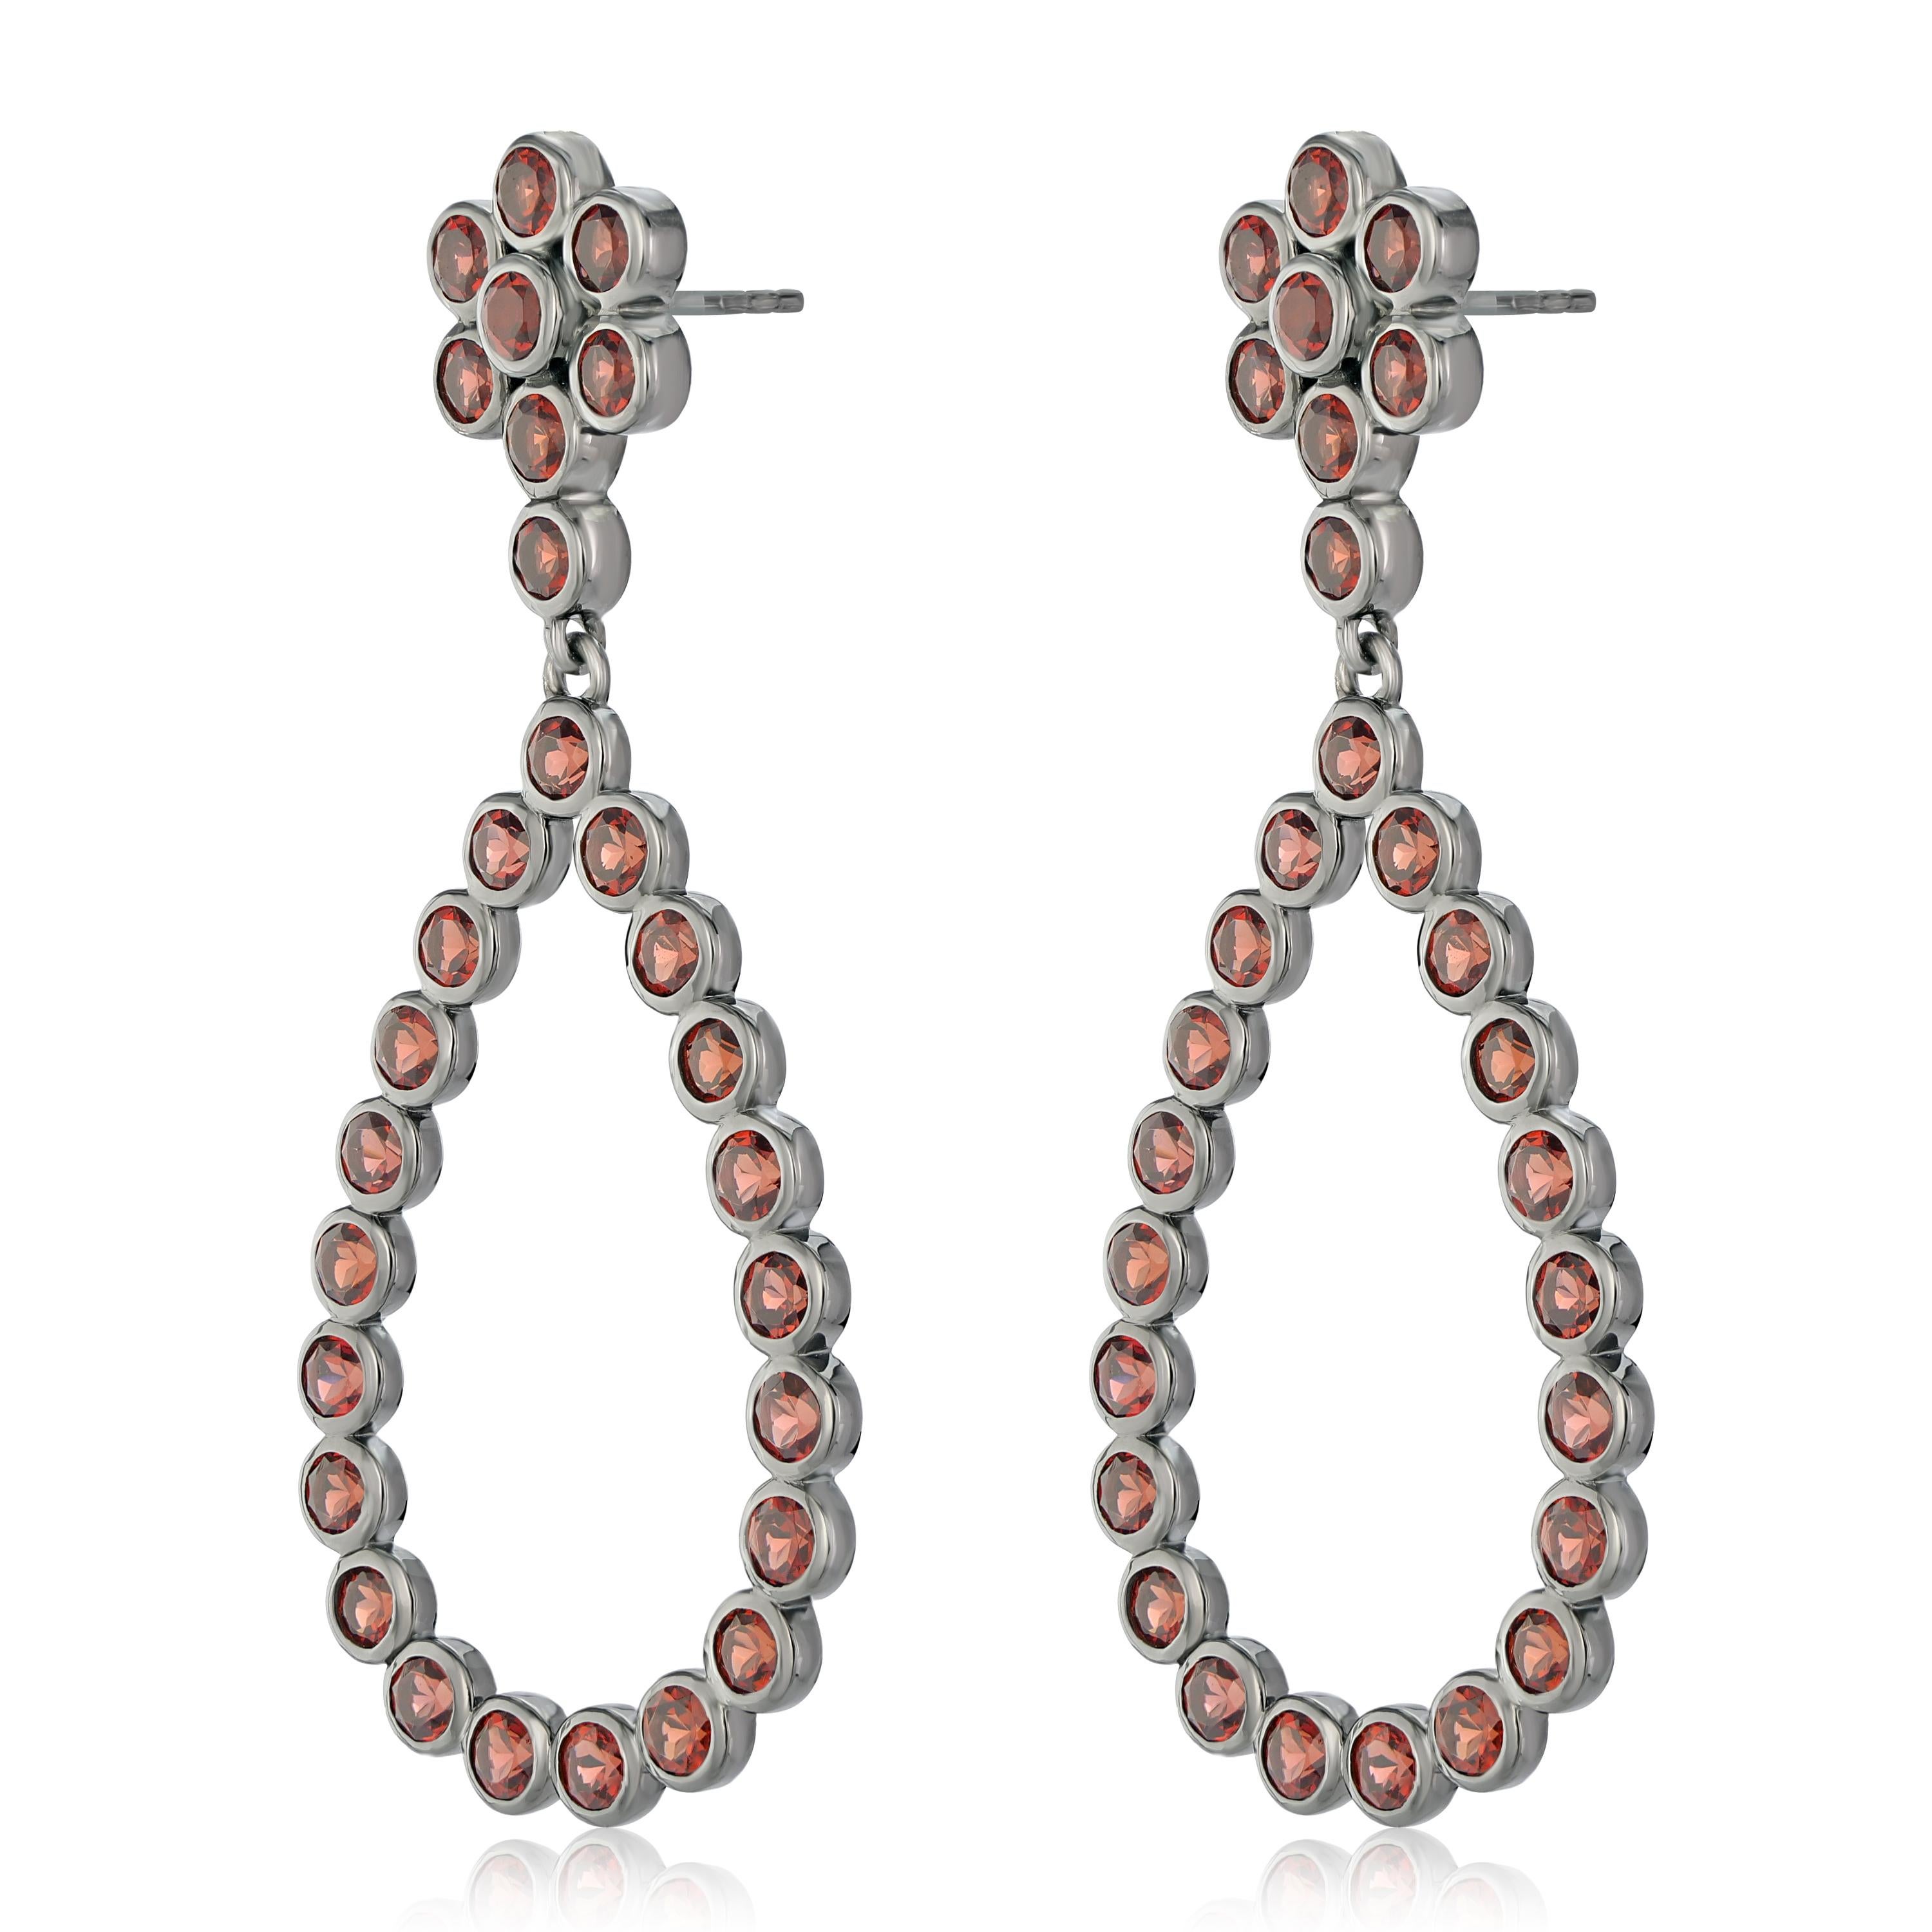 Known to be the birthstone for the month of January, garnets symbolize friendship and trust. These women's earrings feature 3 mm garnets 8.7 Ct  arranged in a floral and open teardrop design. These earrings are crafted in genuine and nickel free